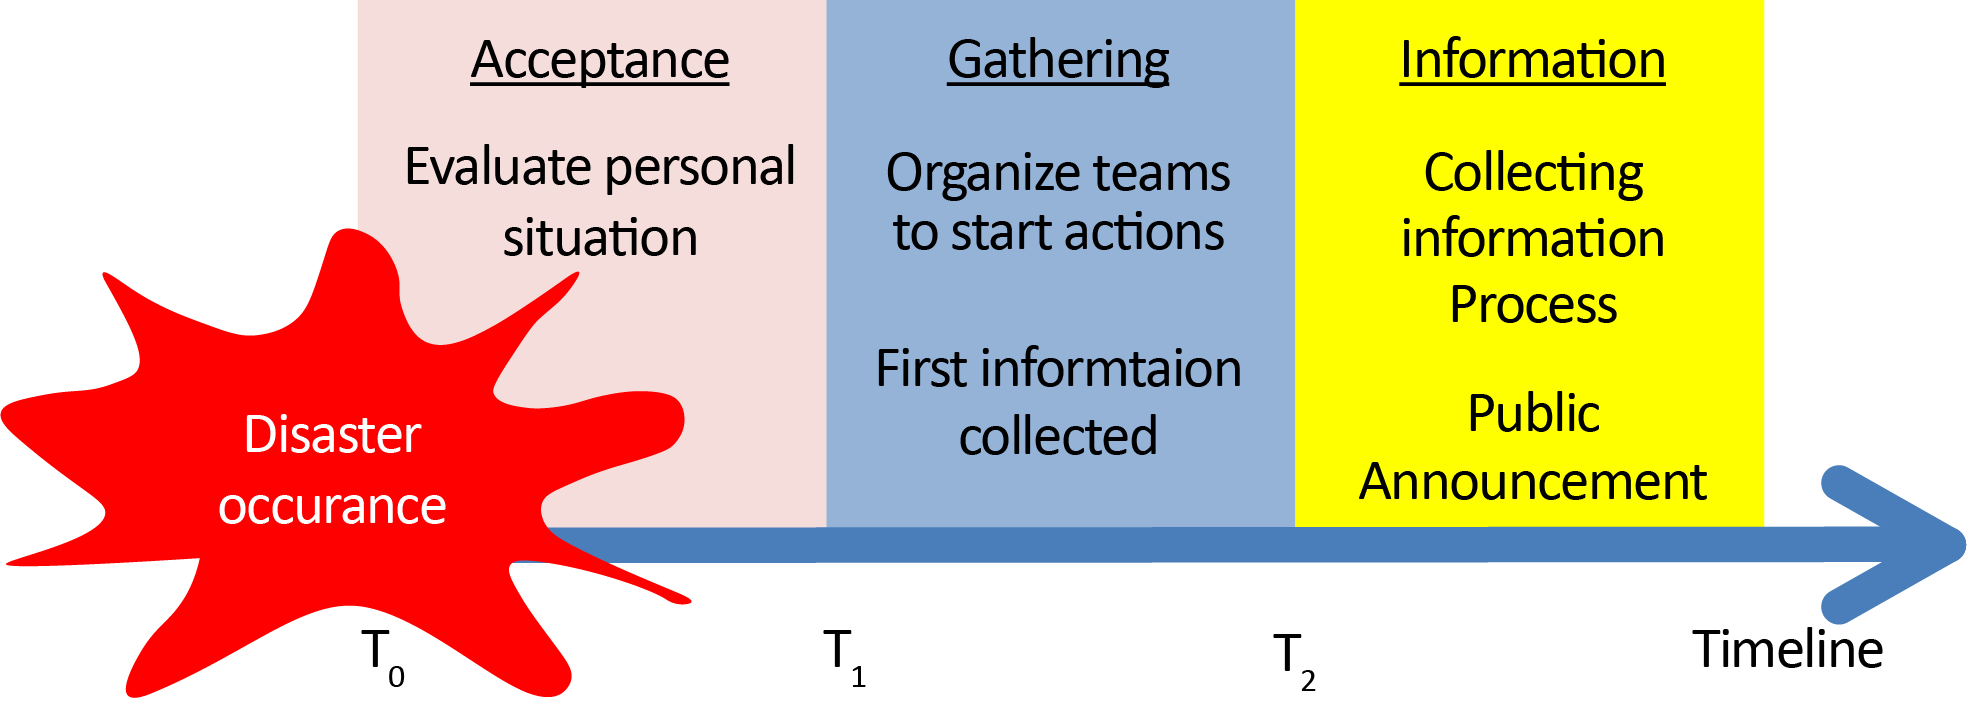 Figure 4.2.2.1 Role of Information Management in Disaster Management